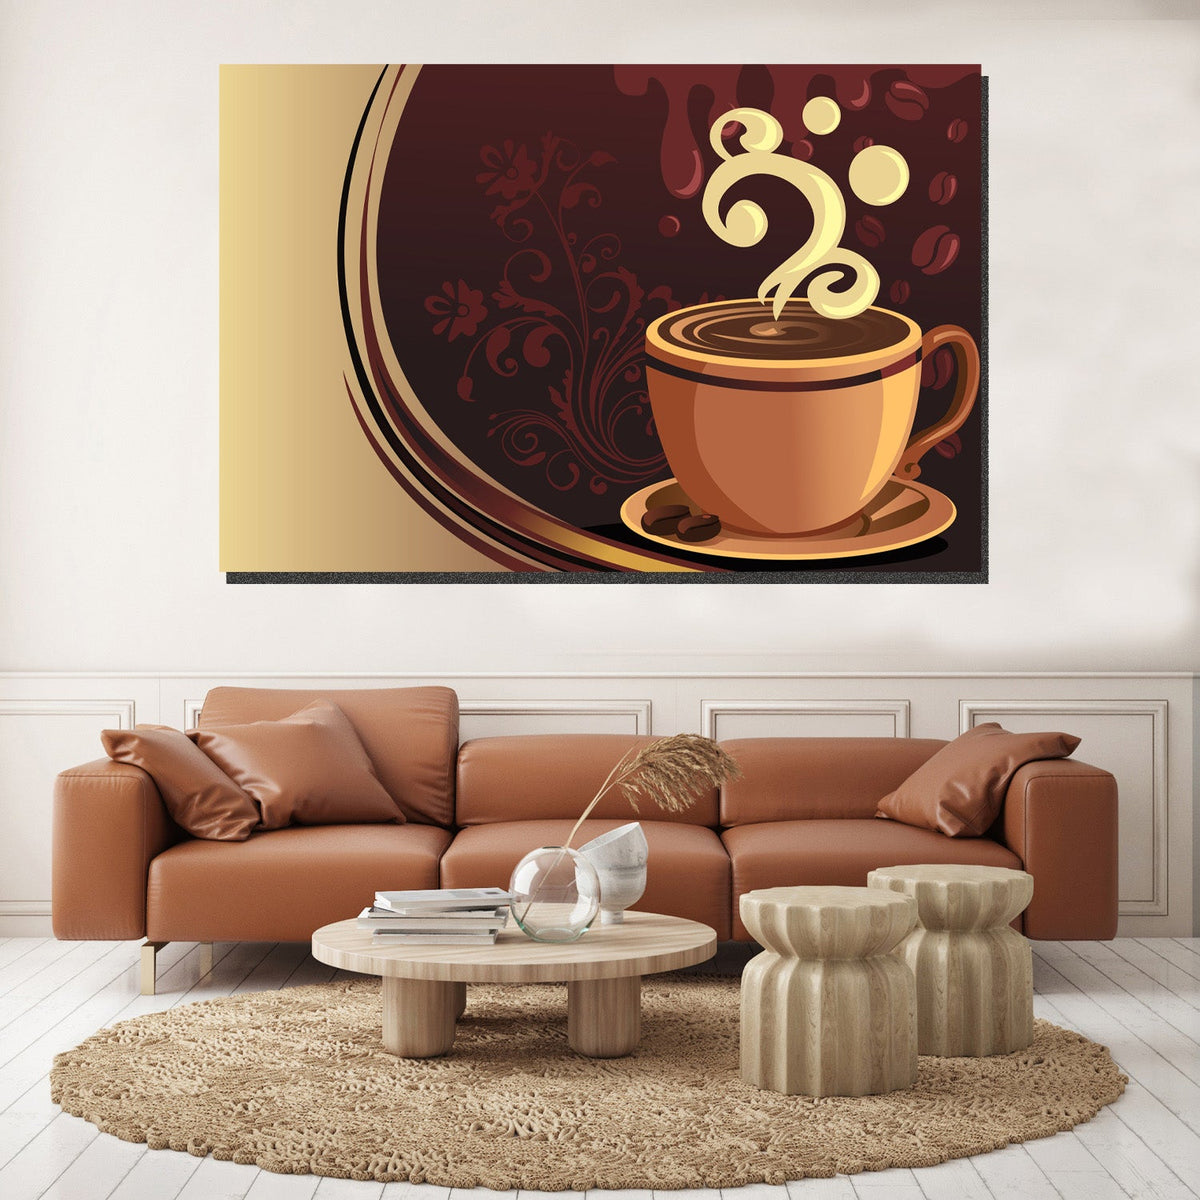 https://cdn.shopify.com/s/files/1/0387/9986/8044/products/CoffeeCupPosterCanvasArtprintStretched-2.jpg